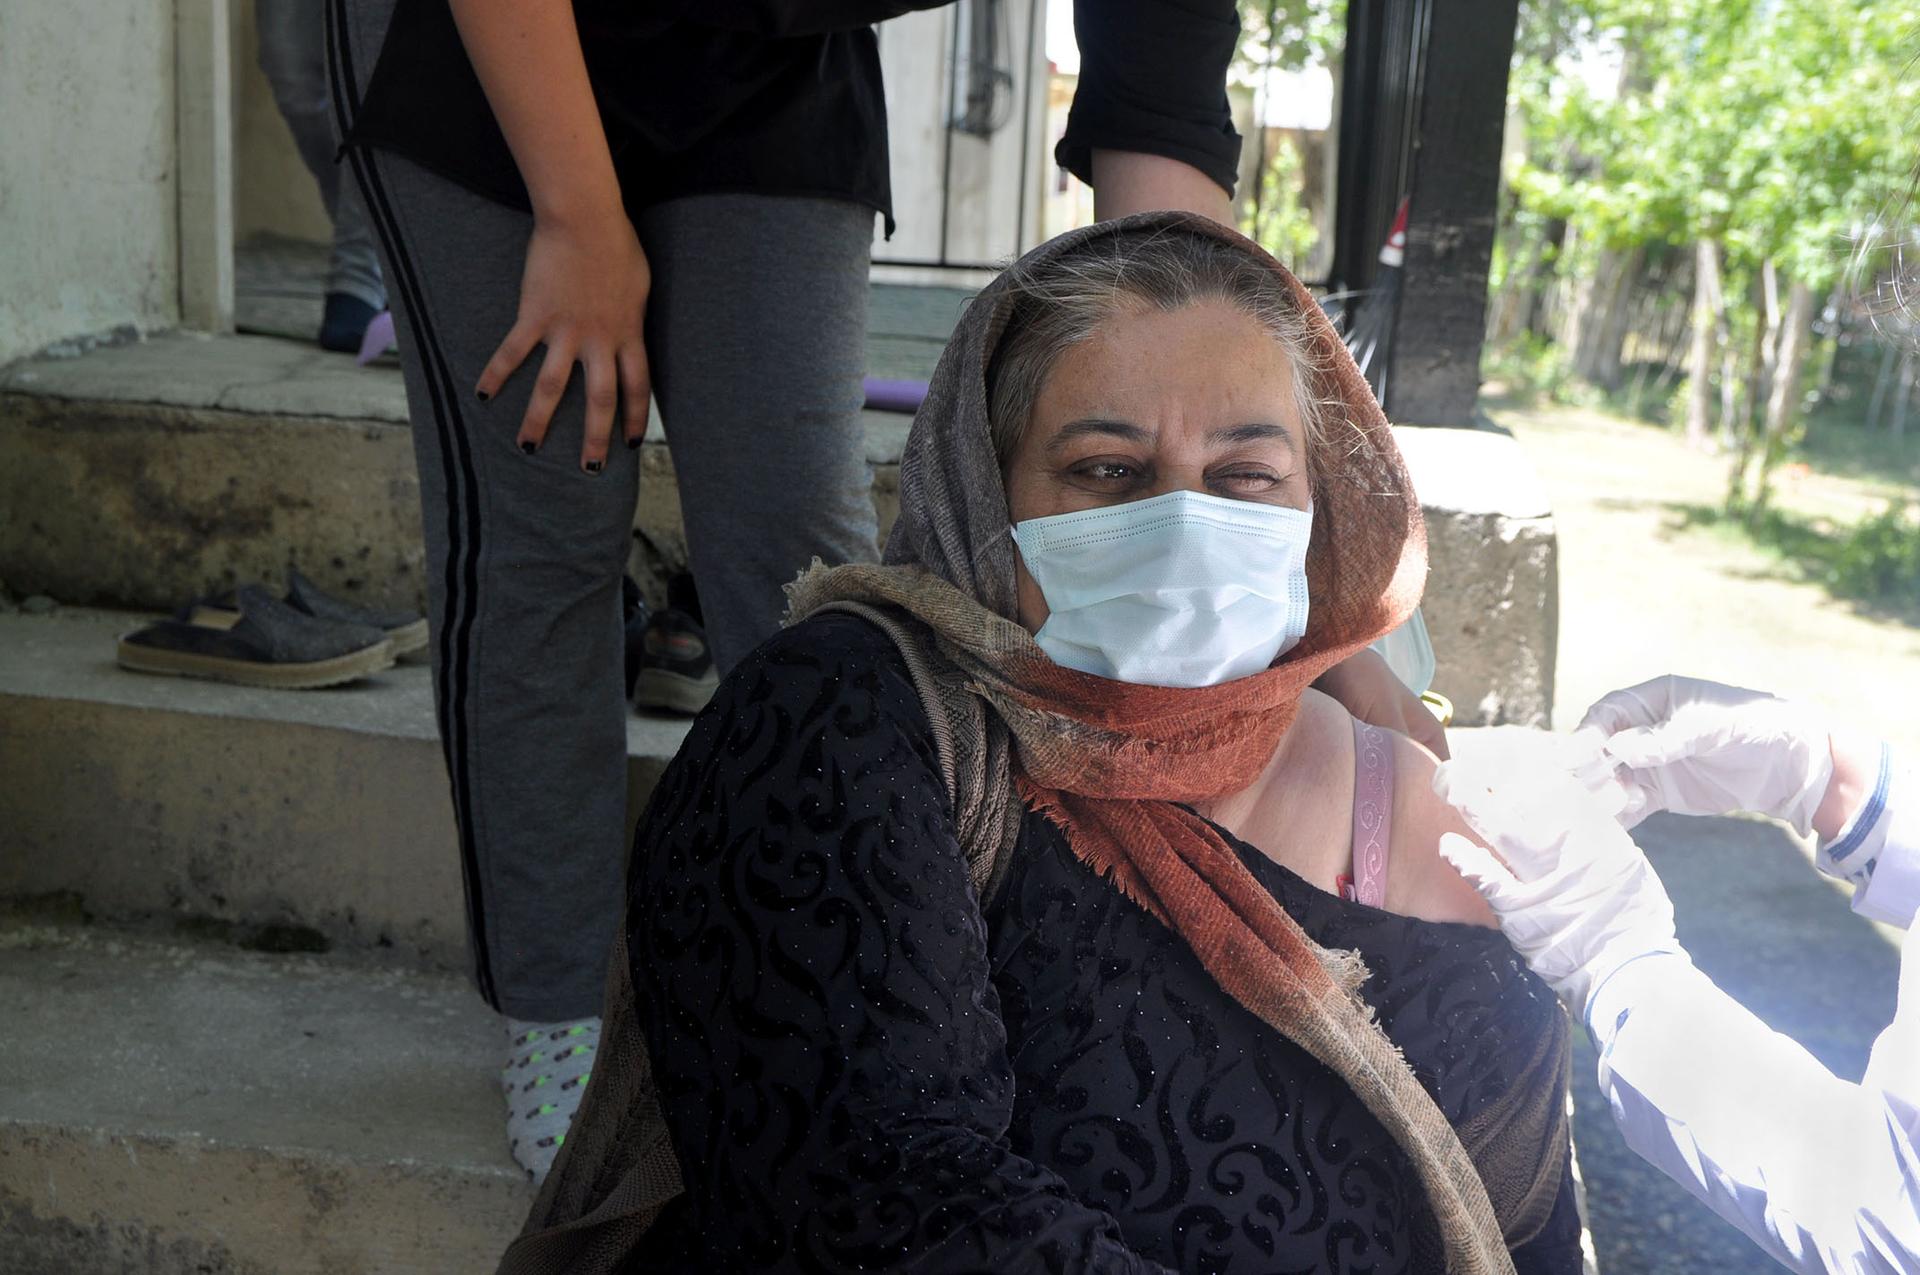 Emine Saruhan winces during a COVID vaccination shot on her front porch in the town of Ömerova. The 46-year-old has a health condition, and hoped a vaccine would alleviate some of her fears.